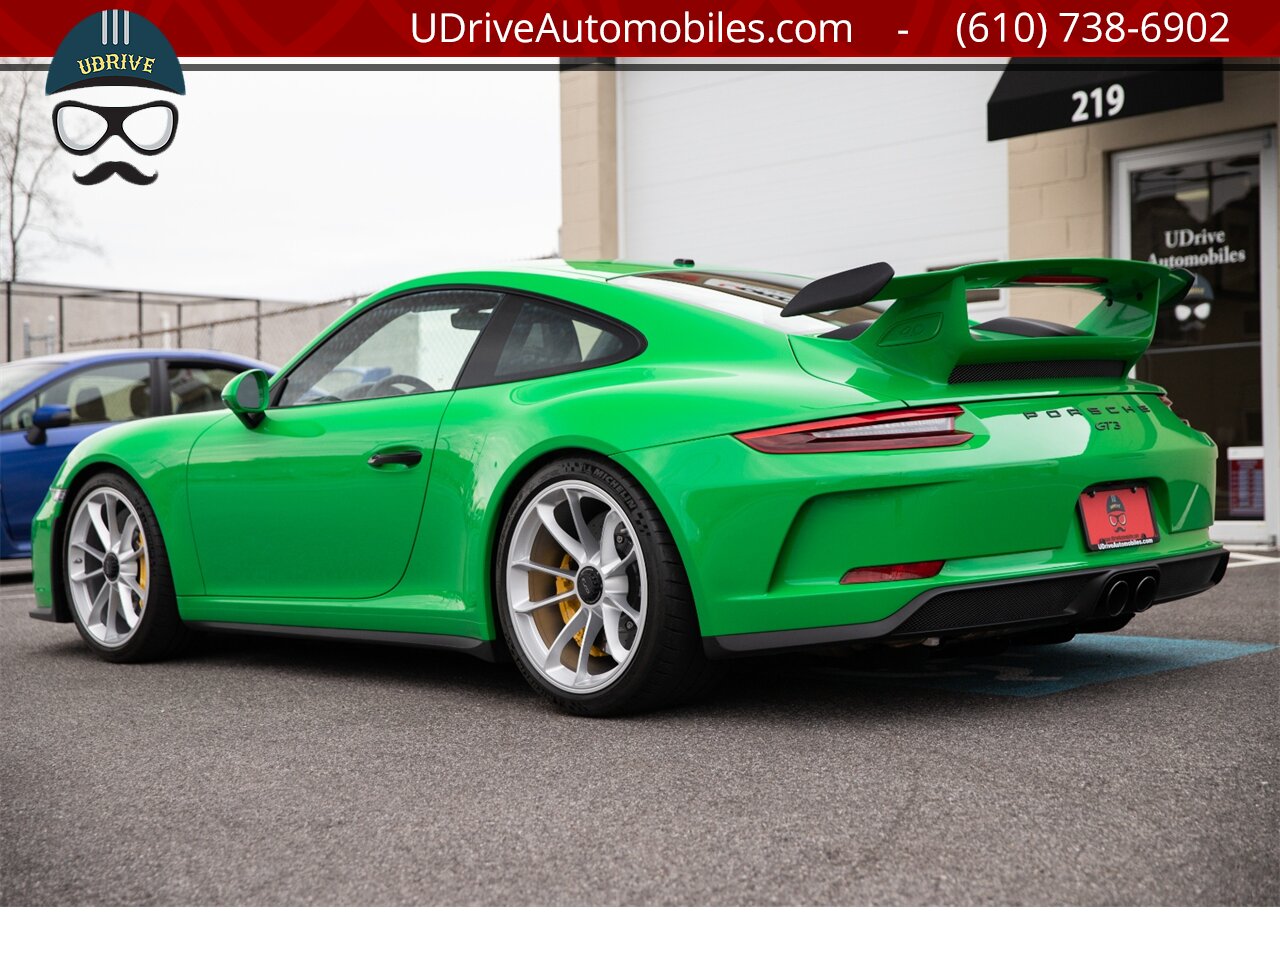 2018 Porsche 911 GT3 6 Speed Paint To Sample Viper Green 48 Miles  Front Axle Lift PCCB Carbon Bucket Seats - Photo 22 - West Chester, PA 19382